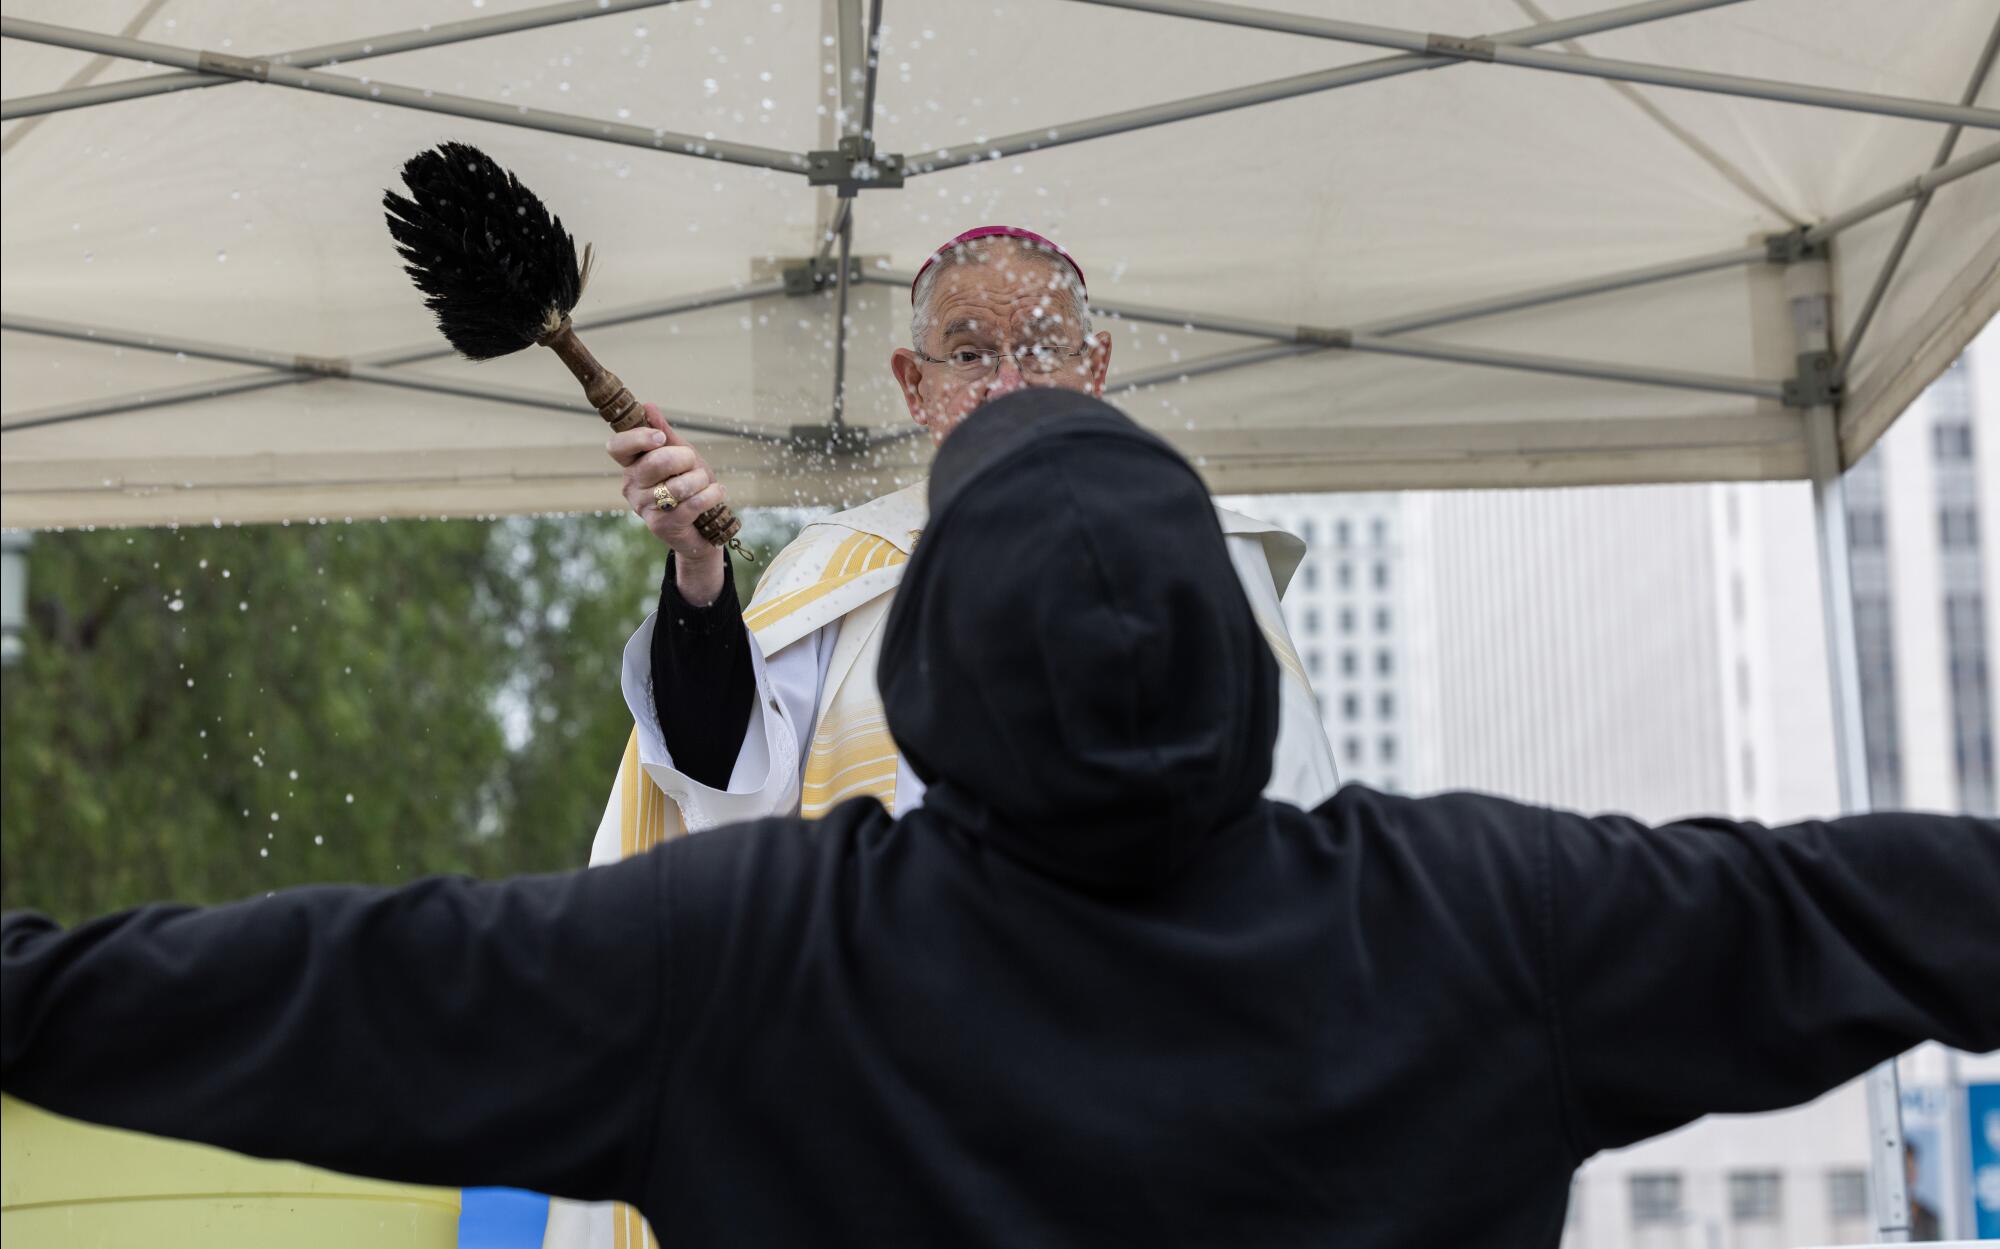 An archbishop splashes water on a man with outstretched arms